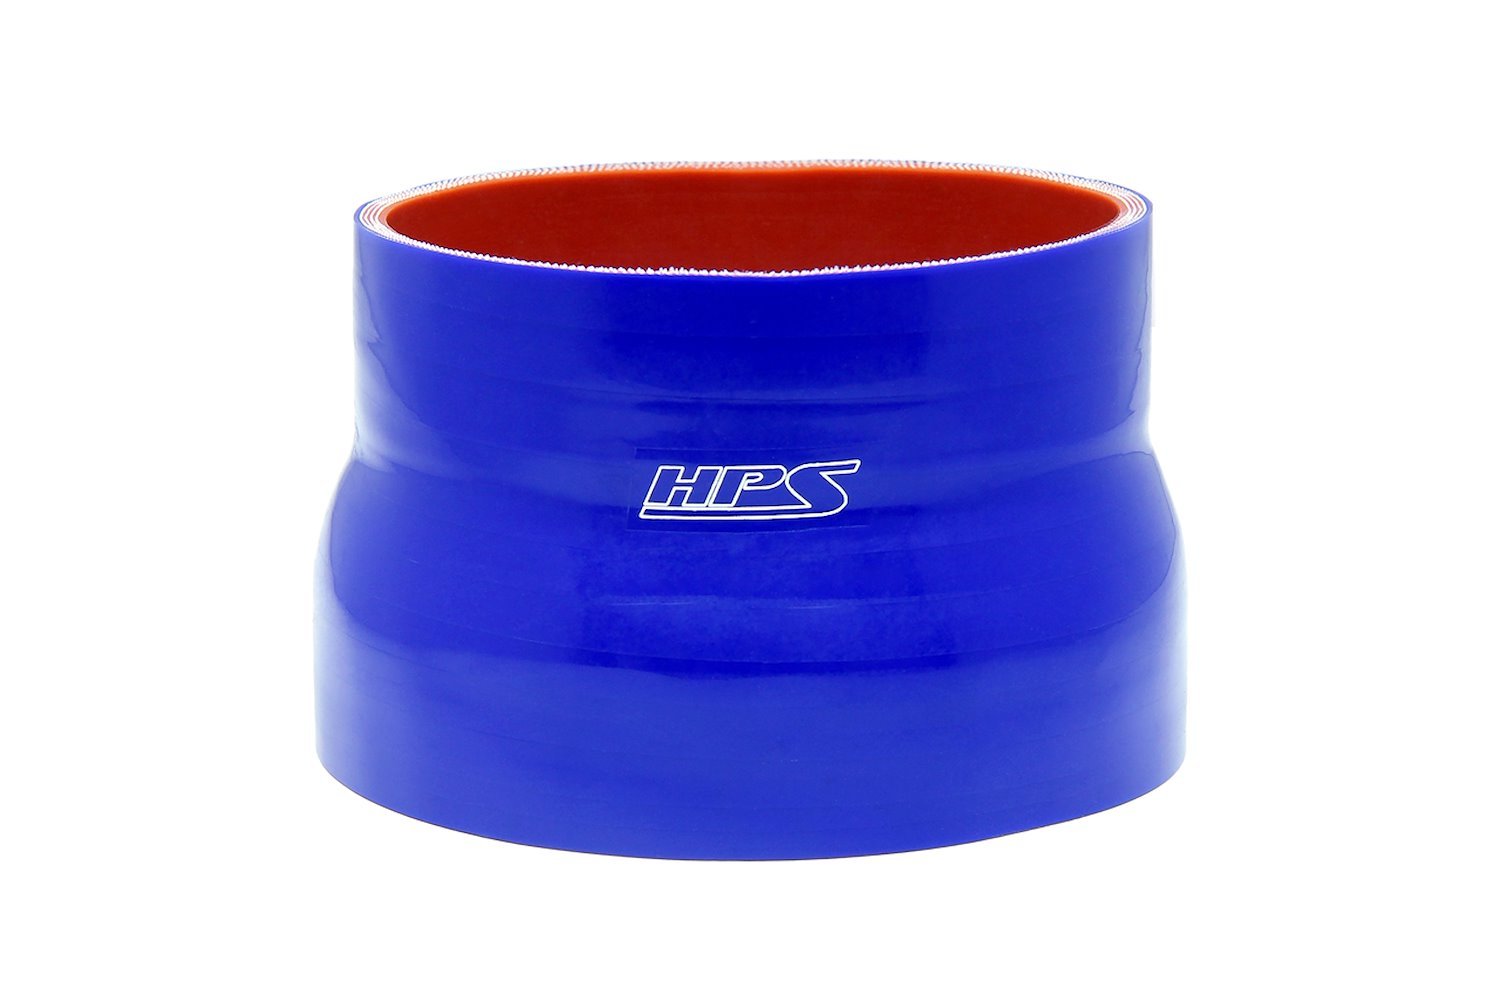 HTSR-450-500-L4-BLUE Silicone Reducer Hose, High-Temp 4-Ply Reinforced, 4-1/2 in. - 5 in. ID, 4 in. Long, Blue